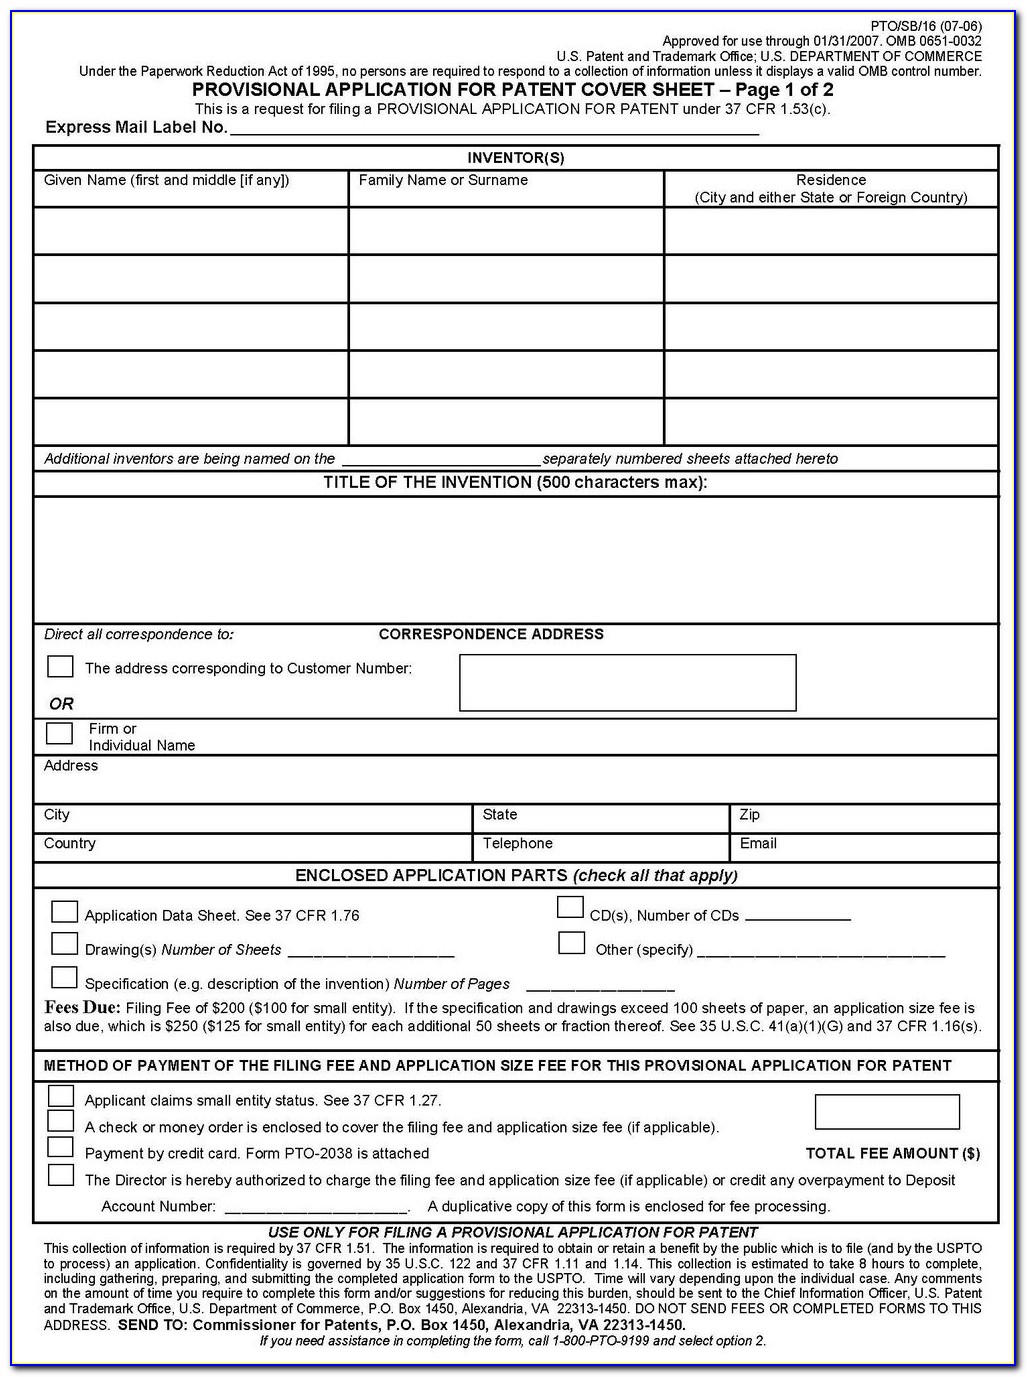 Provisional Patent Application Forms Online